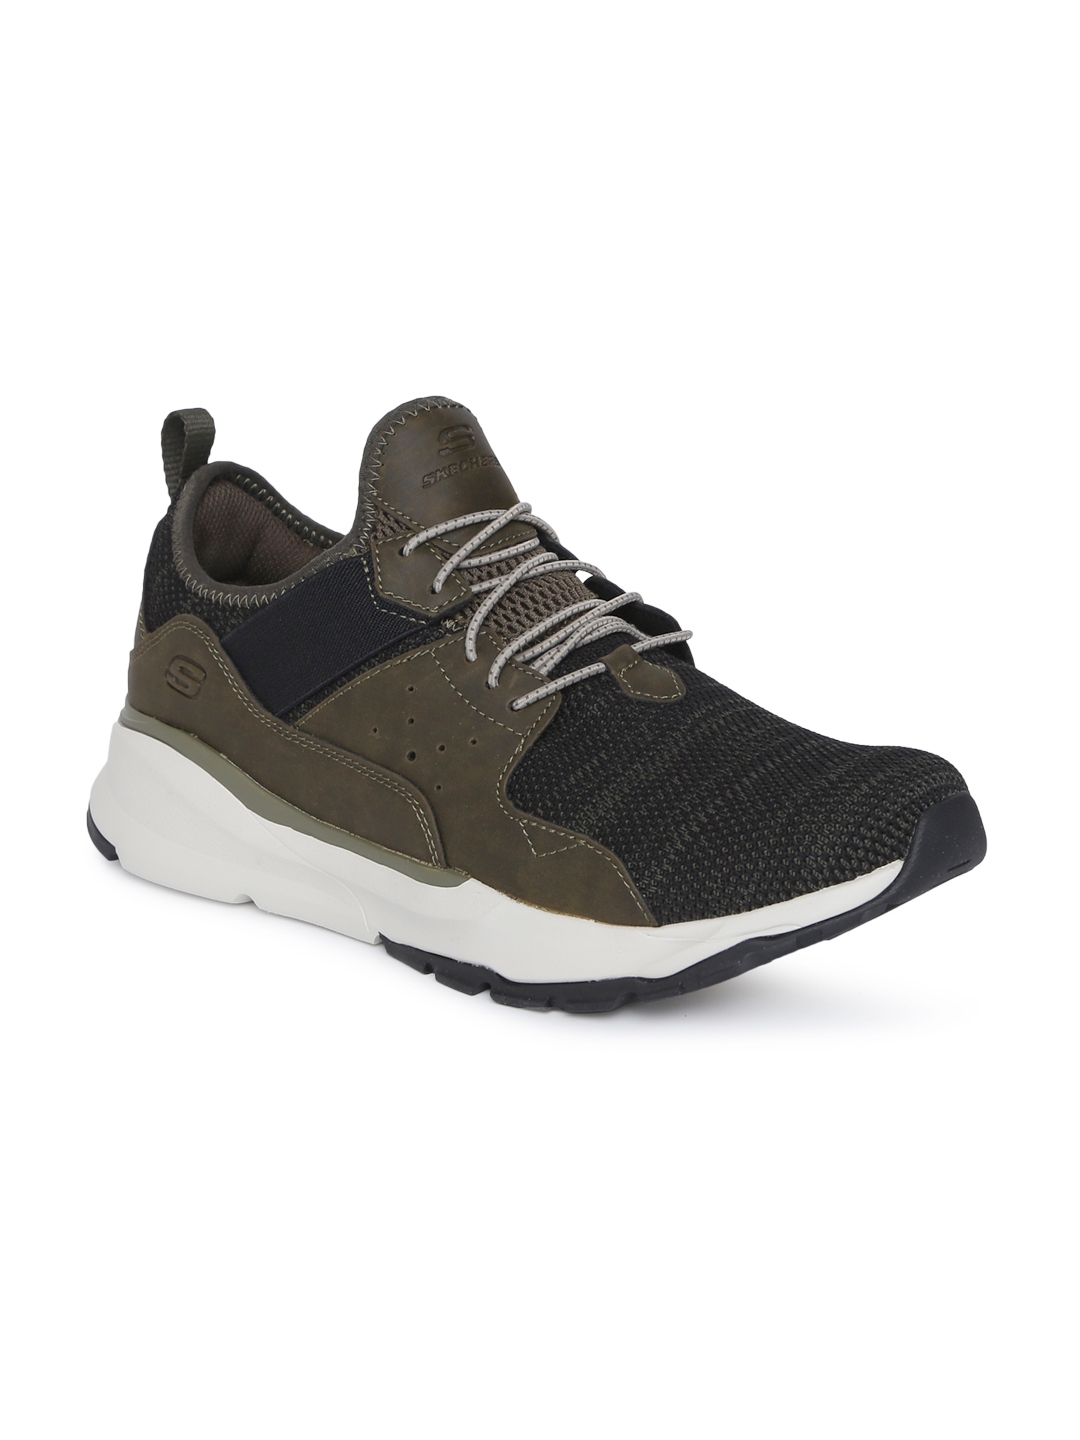 skechers lace up sneakers olive